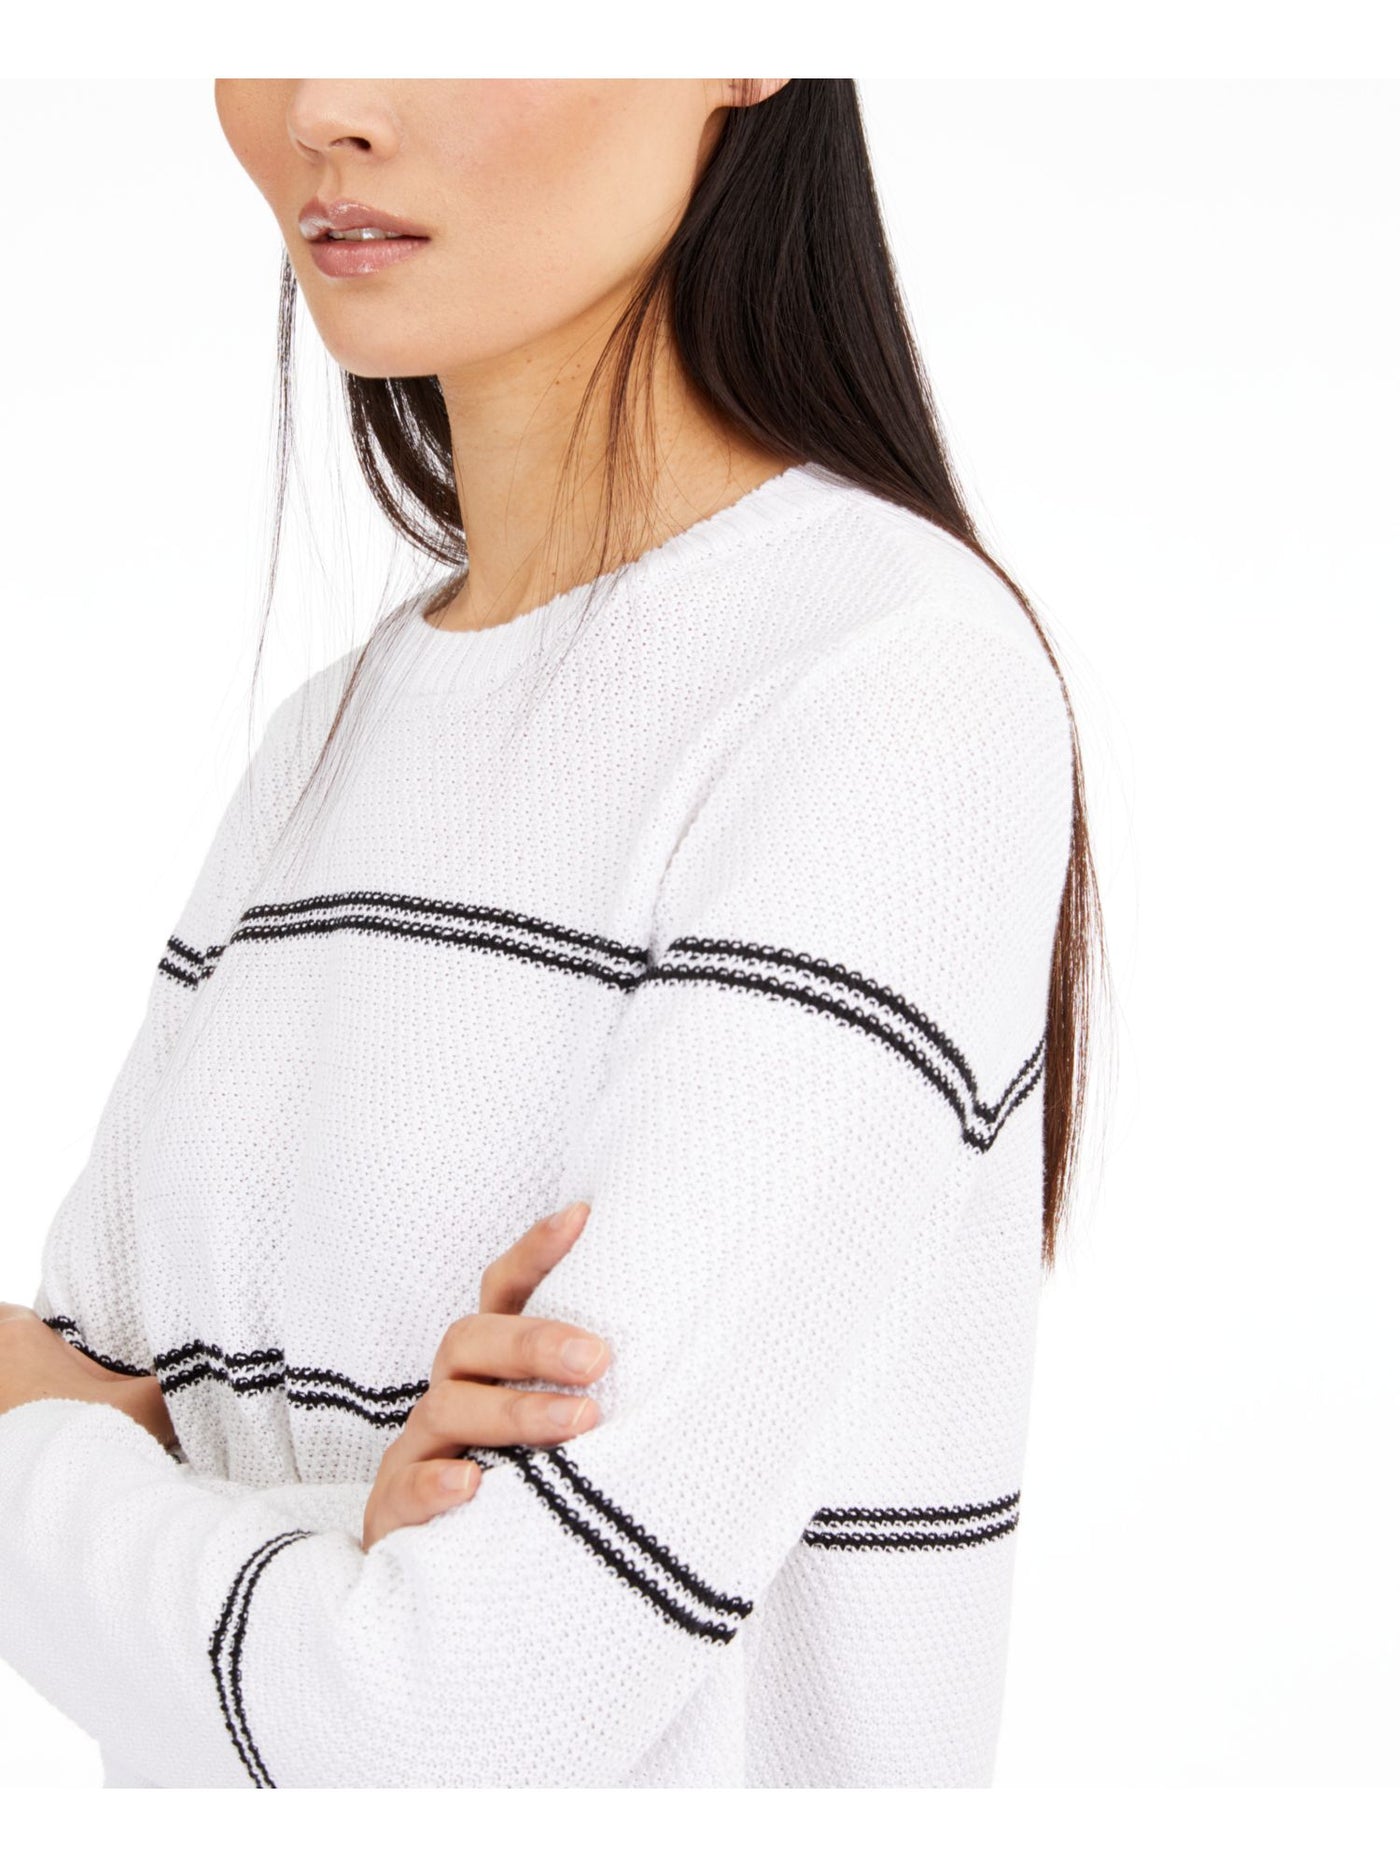 EILEEN FISHER Womens White Striped Long Sleeve Crew Neck Sweater XL